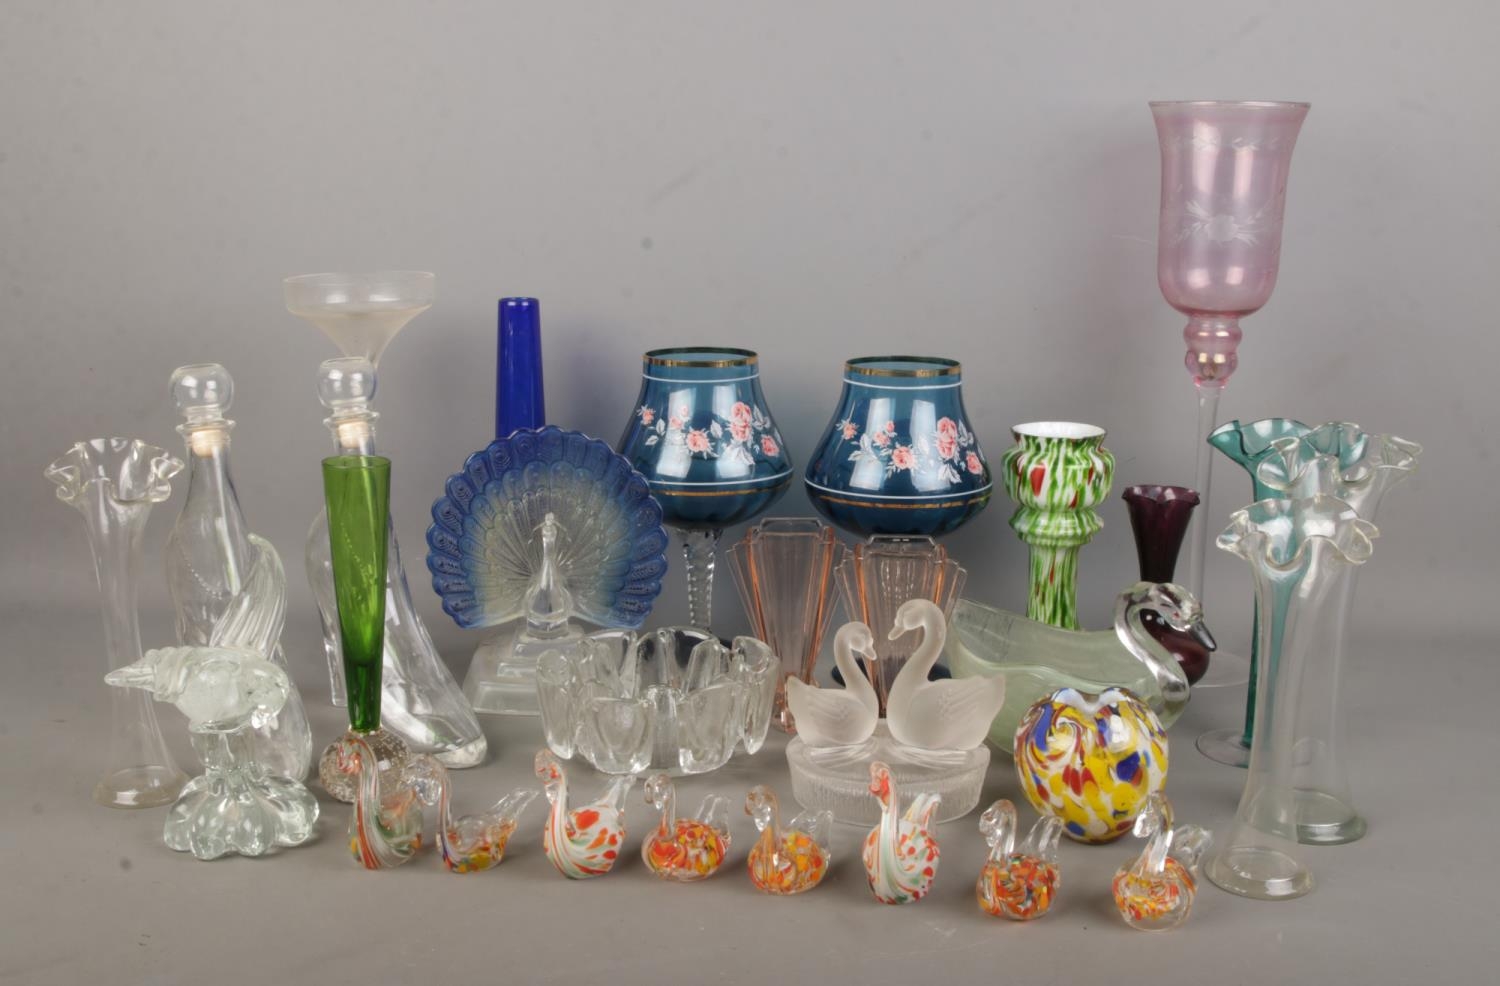 A collection of decorative glassware inlcuding shoe shaped decanters, Murano style birds, coloured